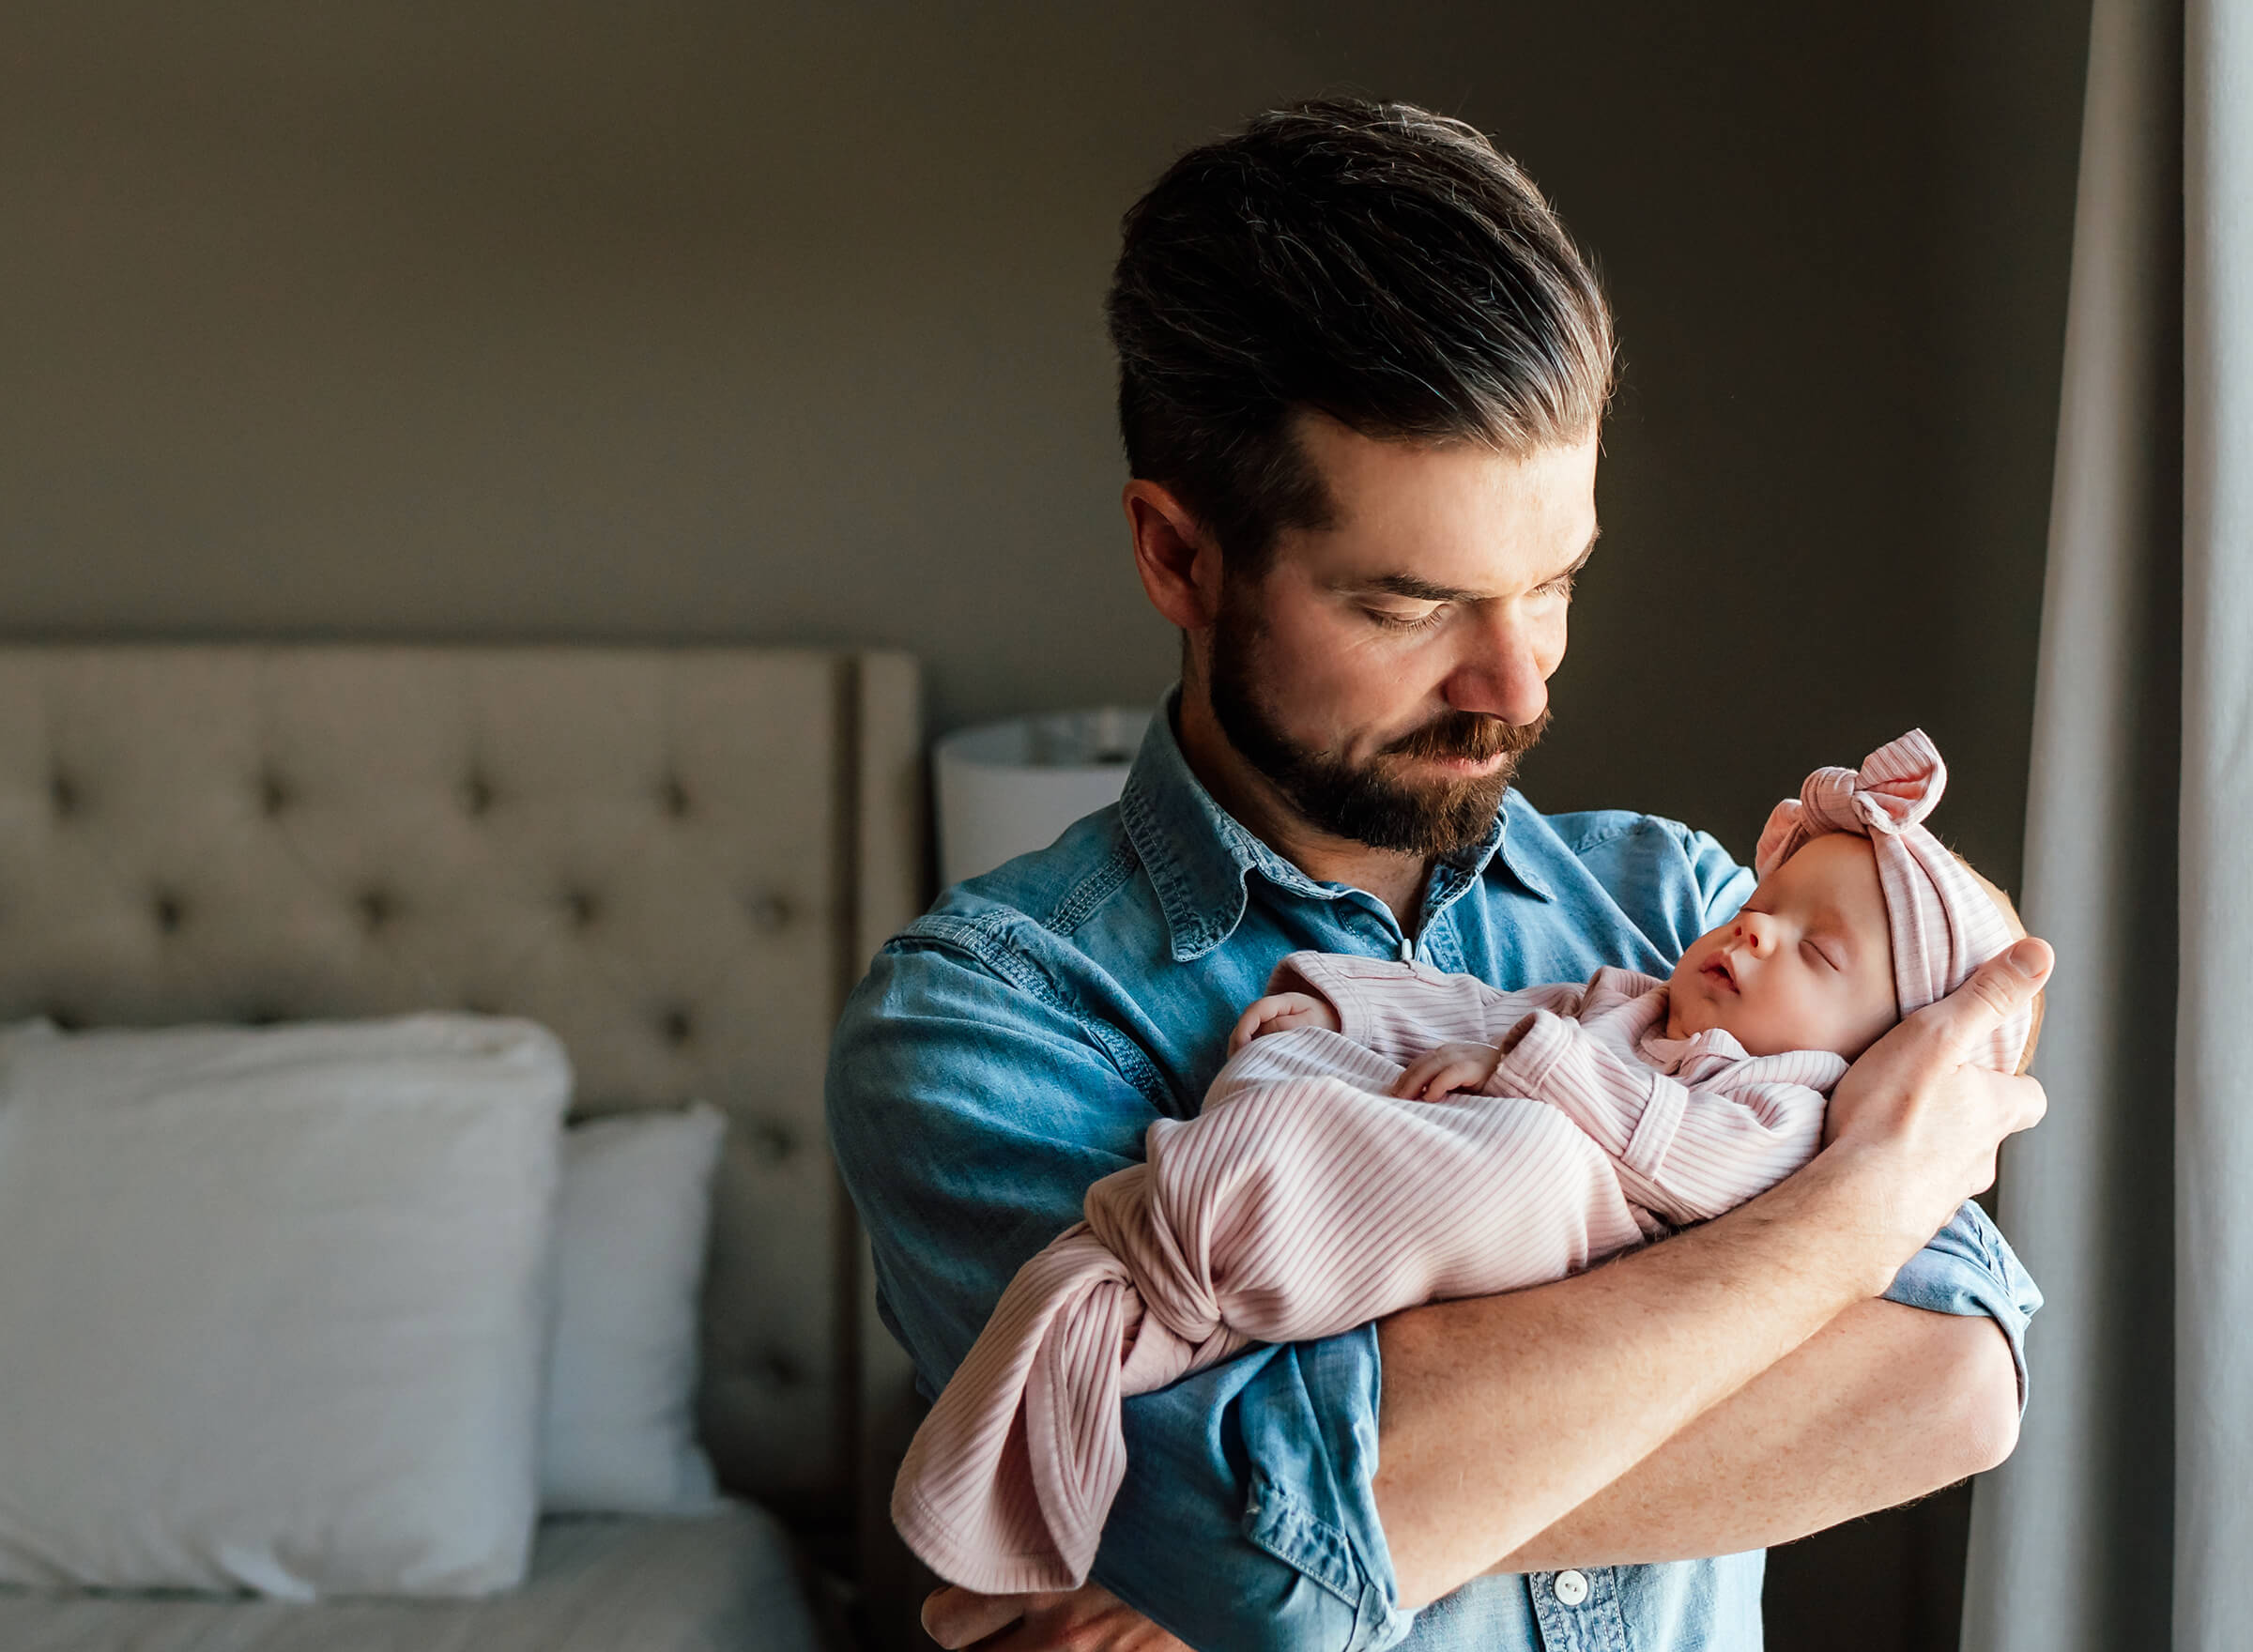 dad with his newborn daughter using natural window light